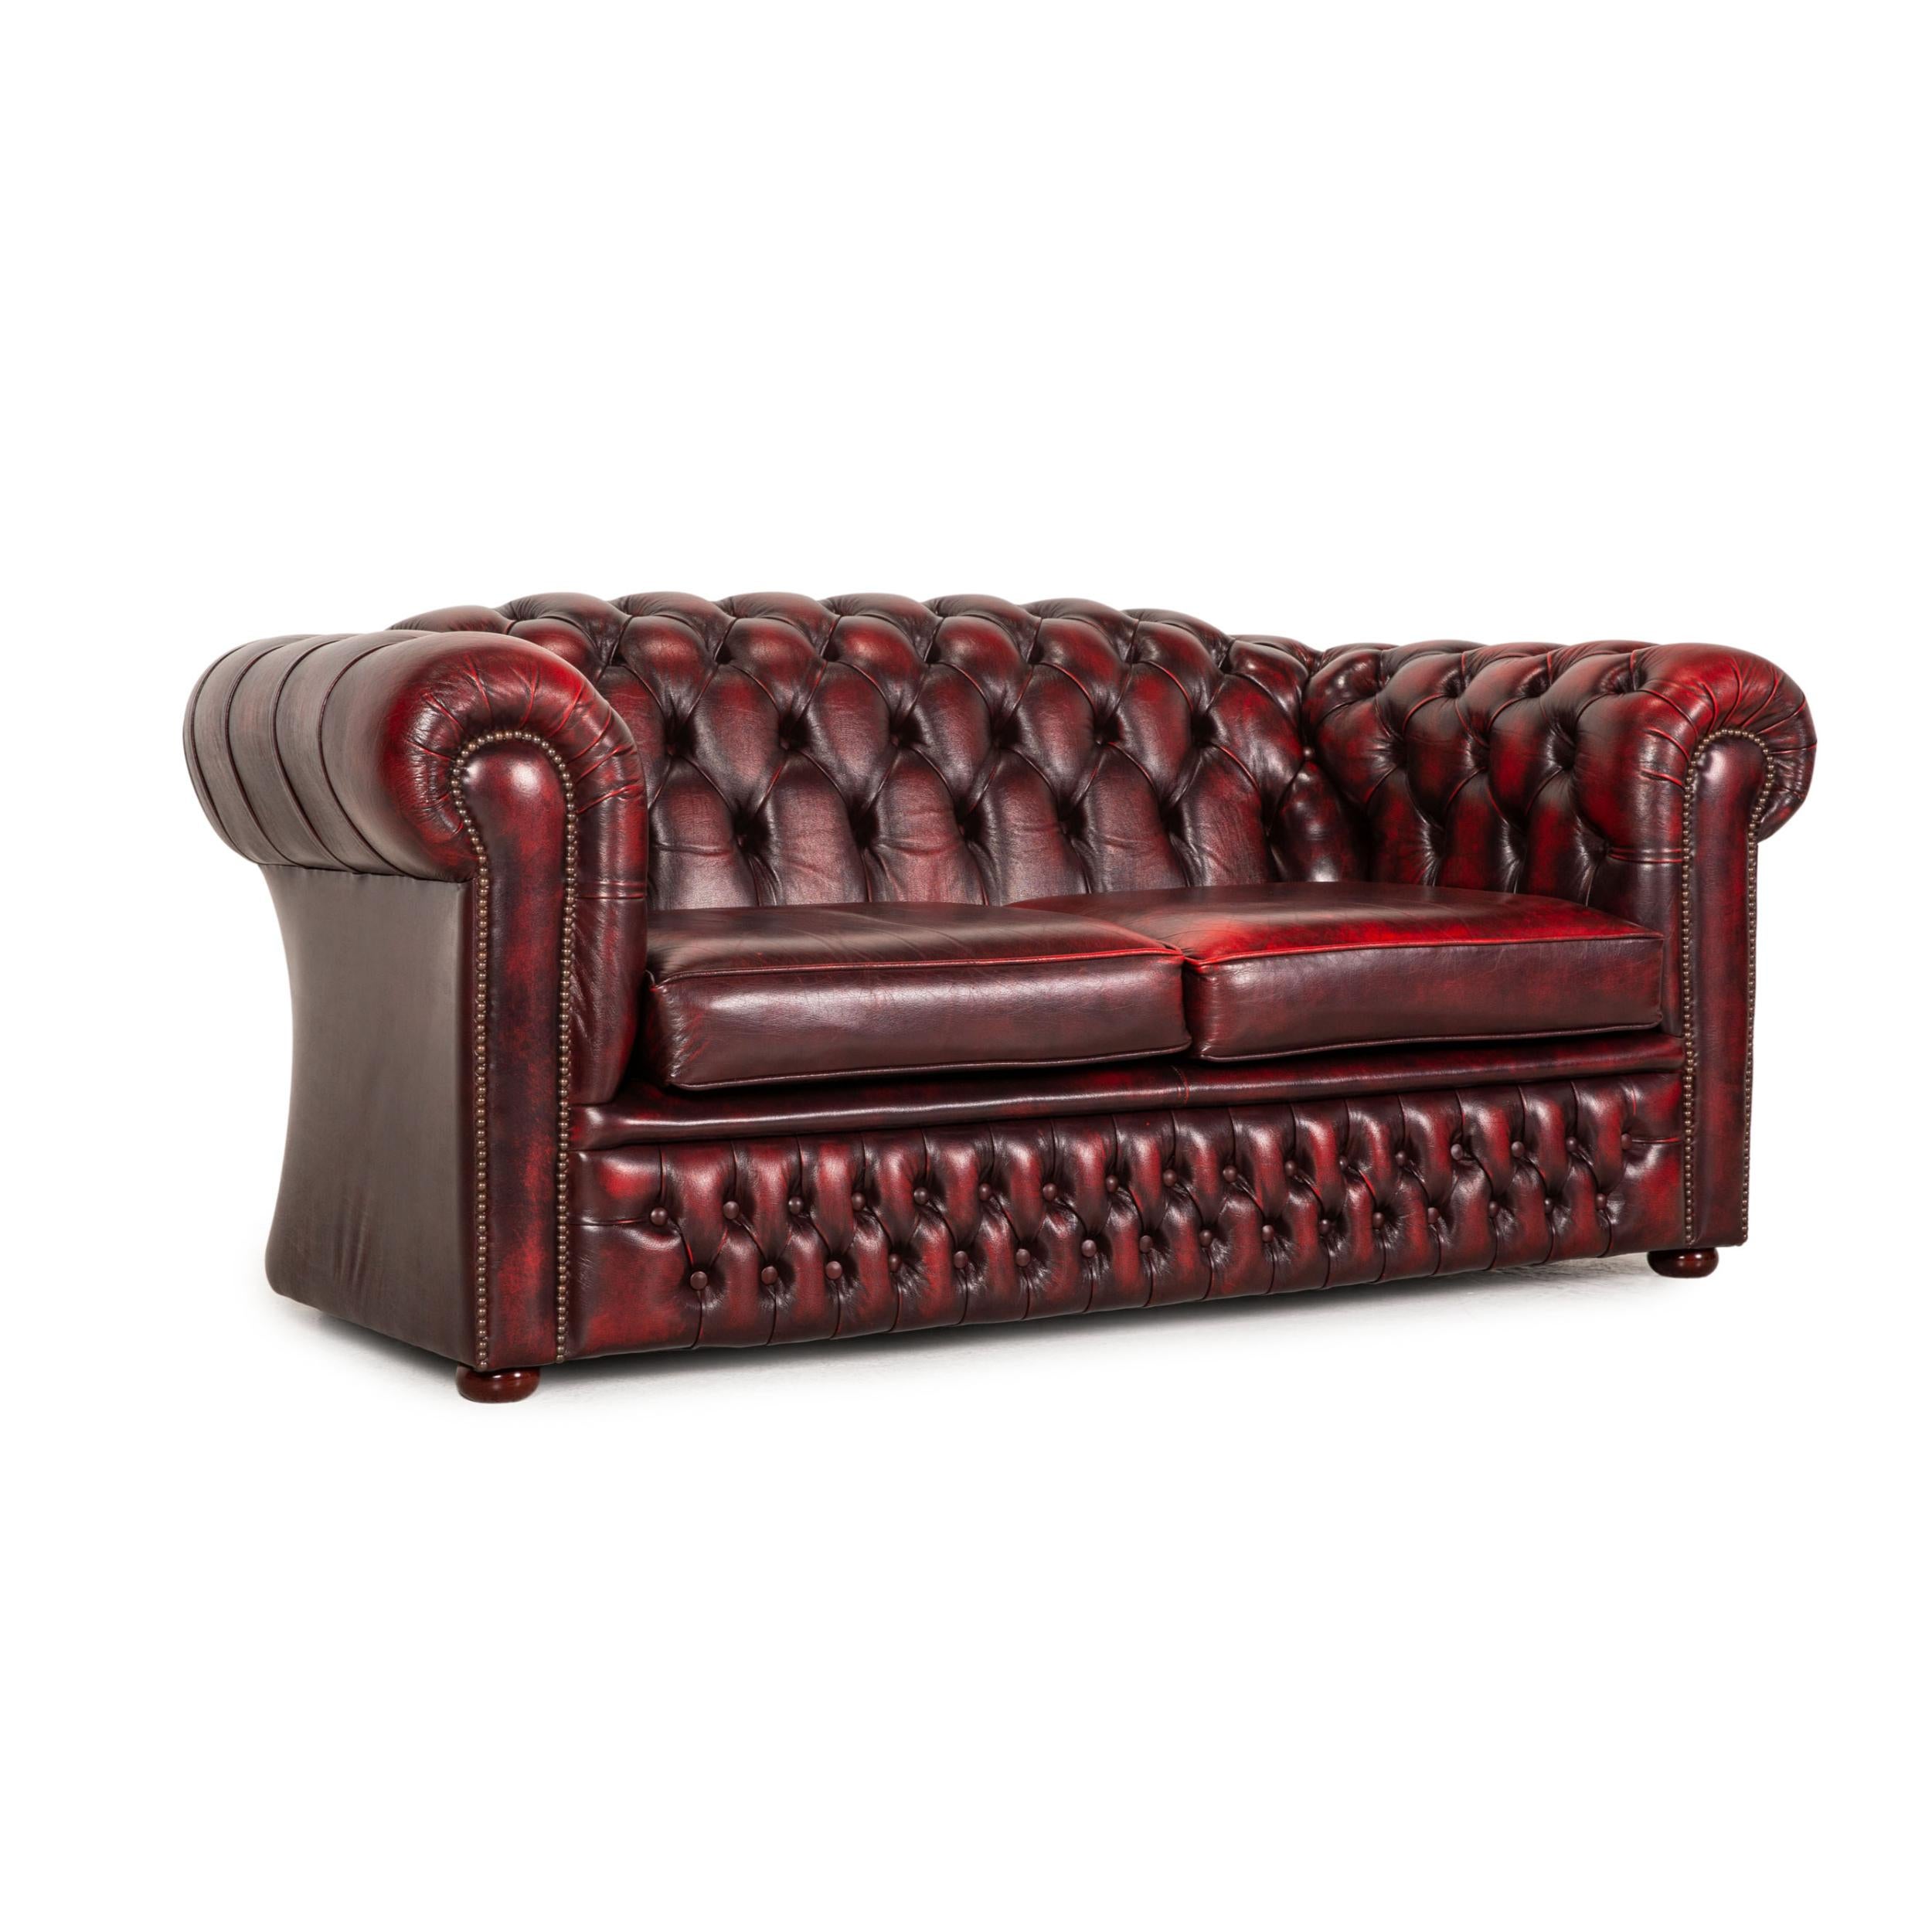 Contemporary Chesterfield Tudor Leather Sofa Dark Red Two Seater Couch